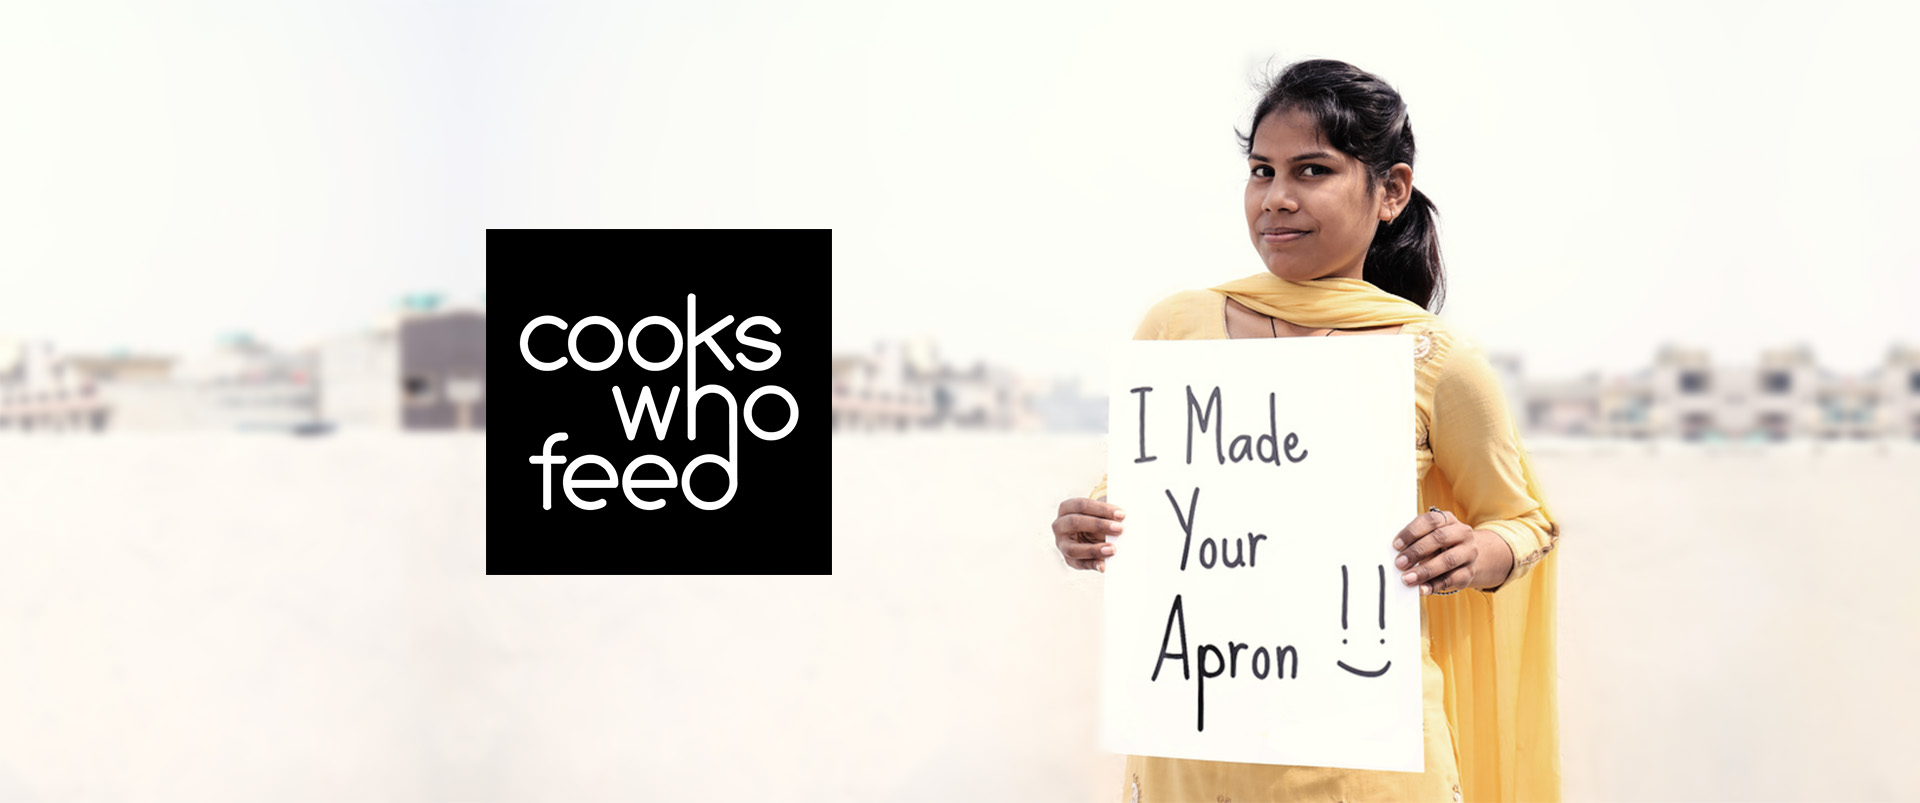 Cooks who Feed. Woman who is part of the cooks who feed community is holding a sign that reads "I made your apron".